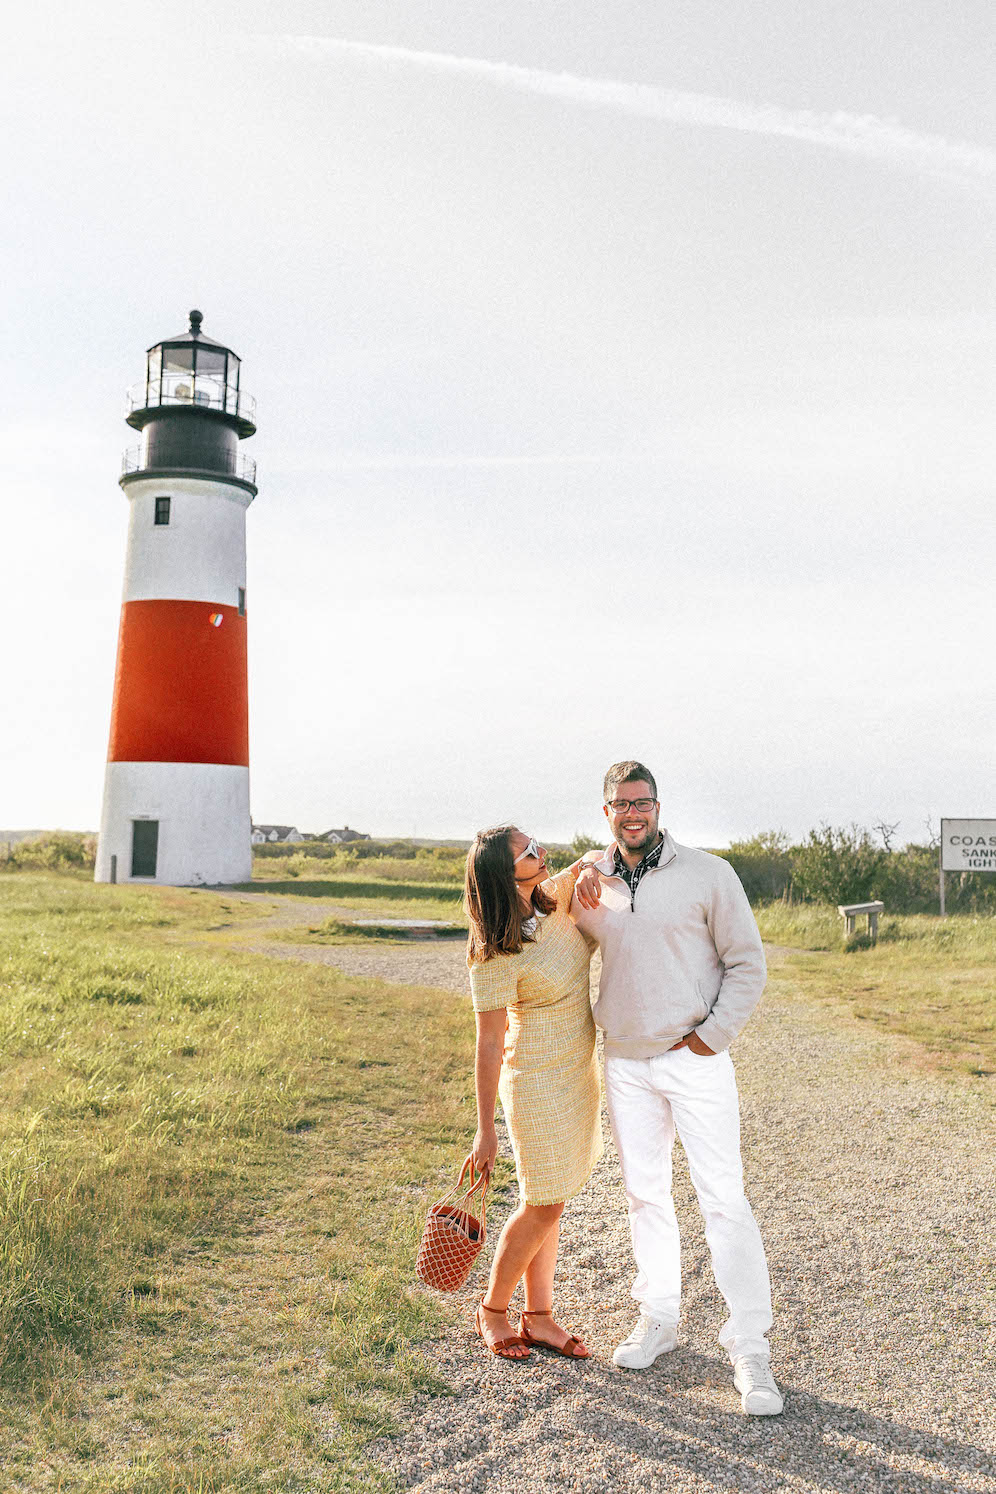 5 Lighthouses You'll Want To Visiting On Your Next Date The Coastal Confidence by Aubrey Yandow